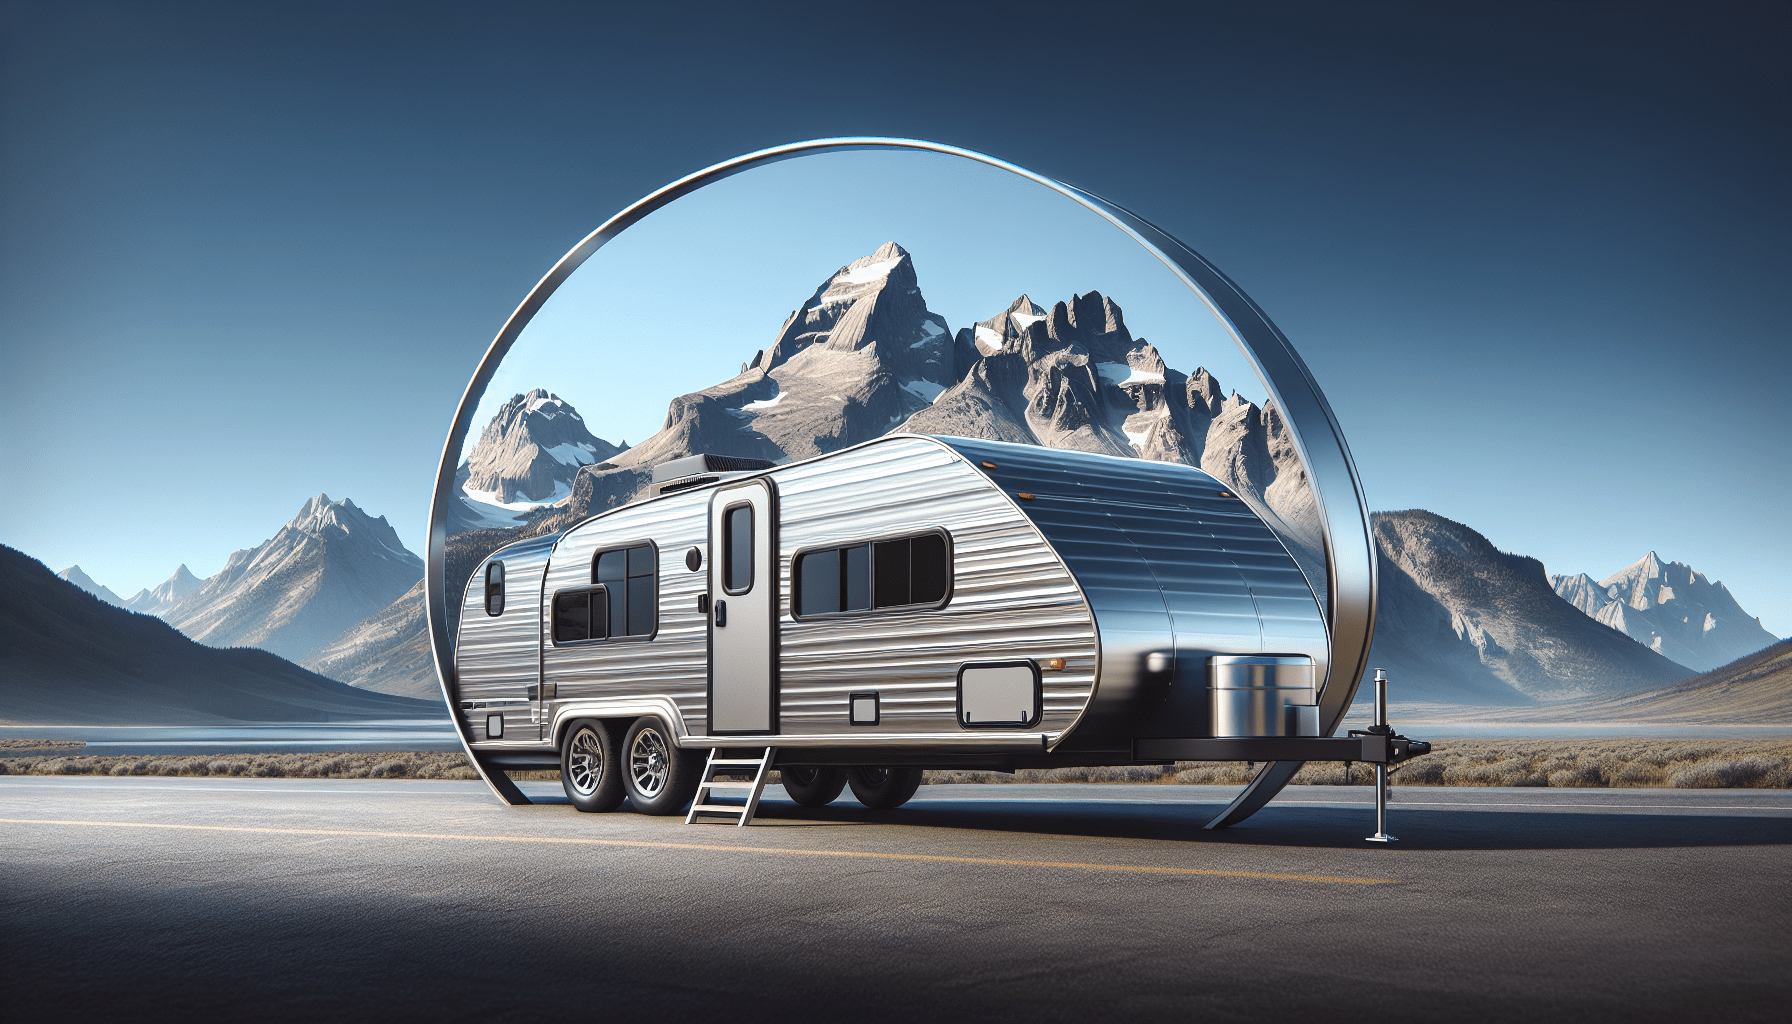 What Is The Best Travel Trailer For Longevity?